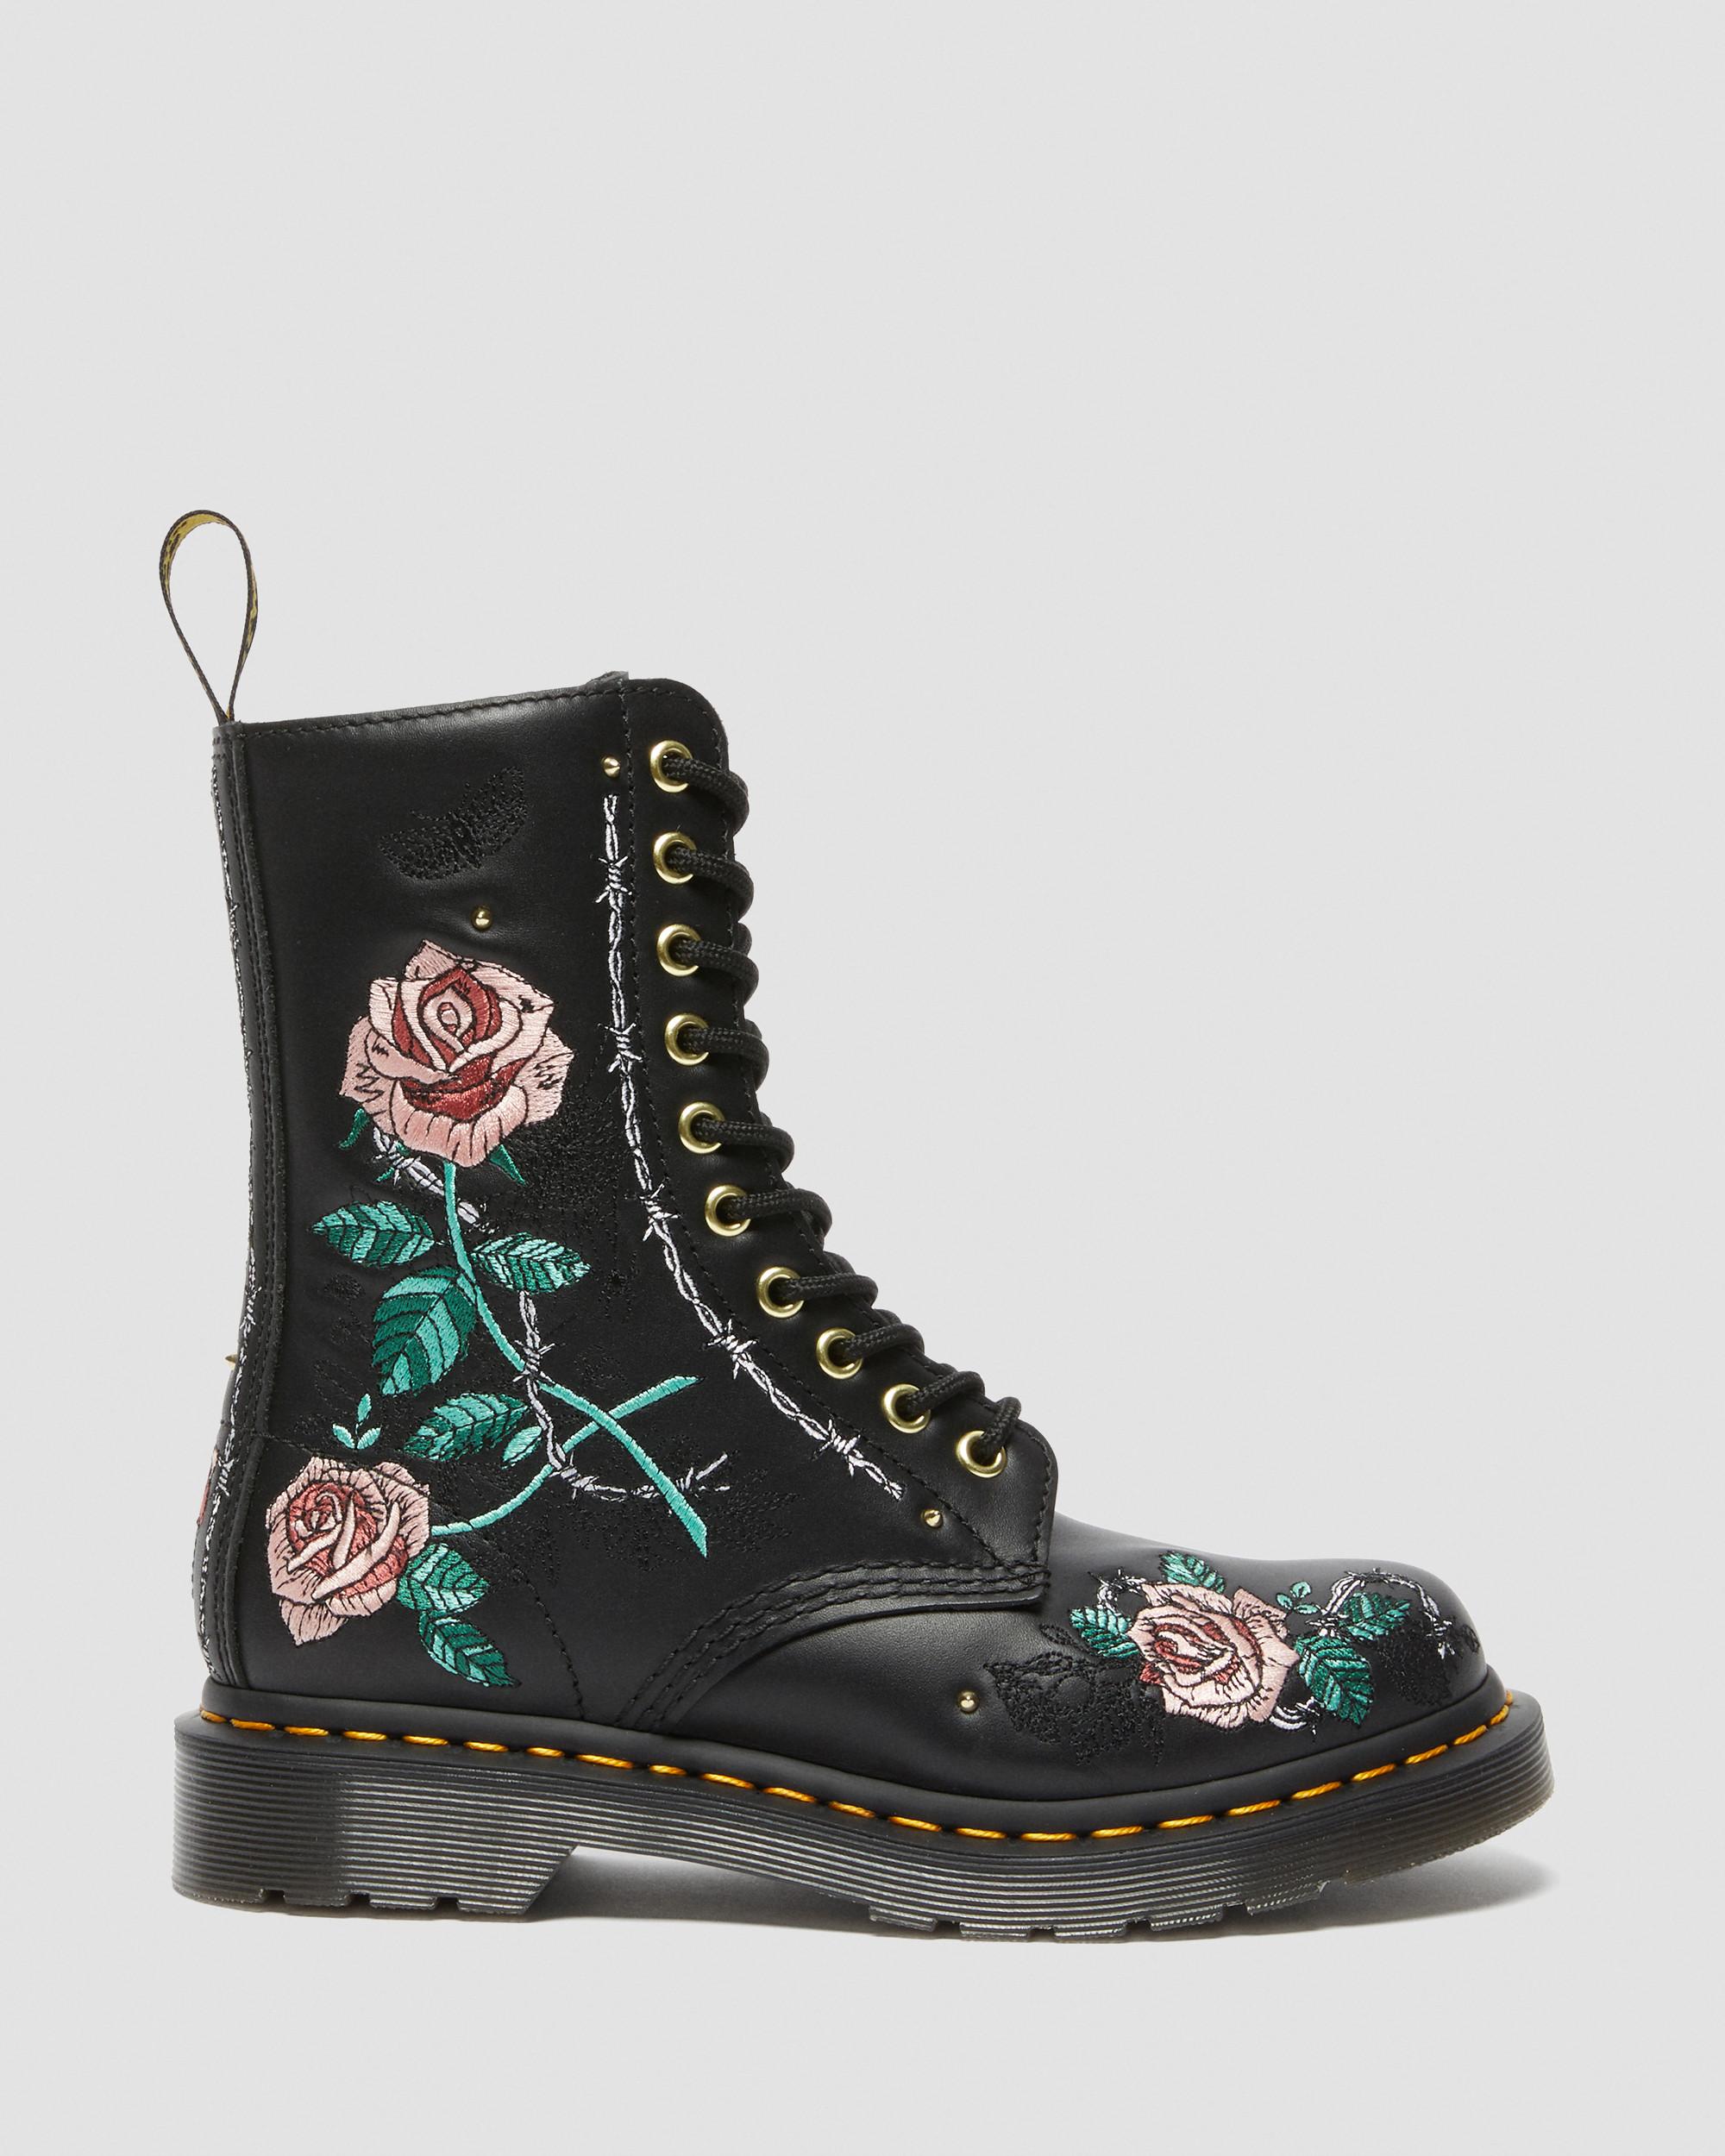 1490 Vonda Floral Leather Mid Calf Boots in Black | Dr. Martens